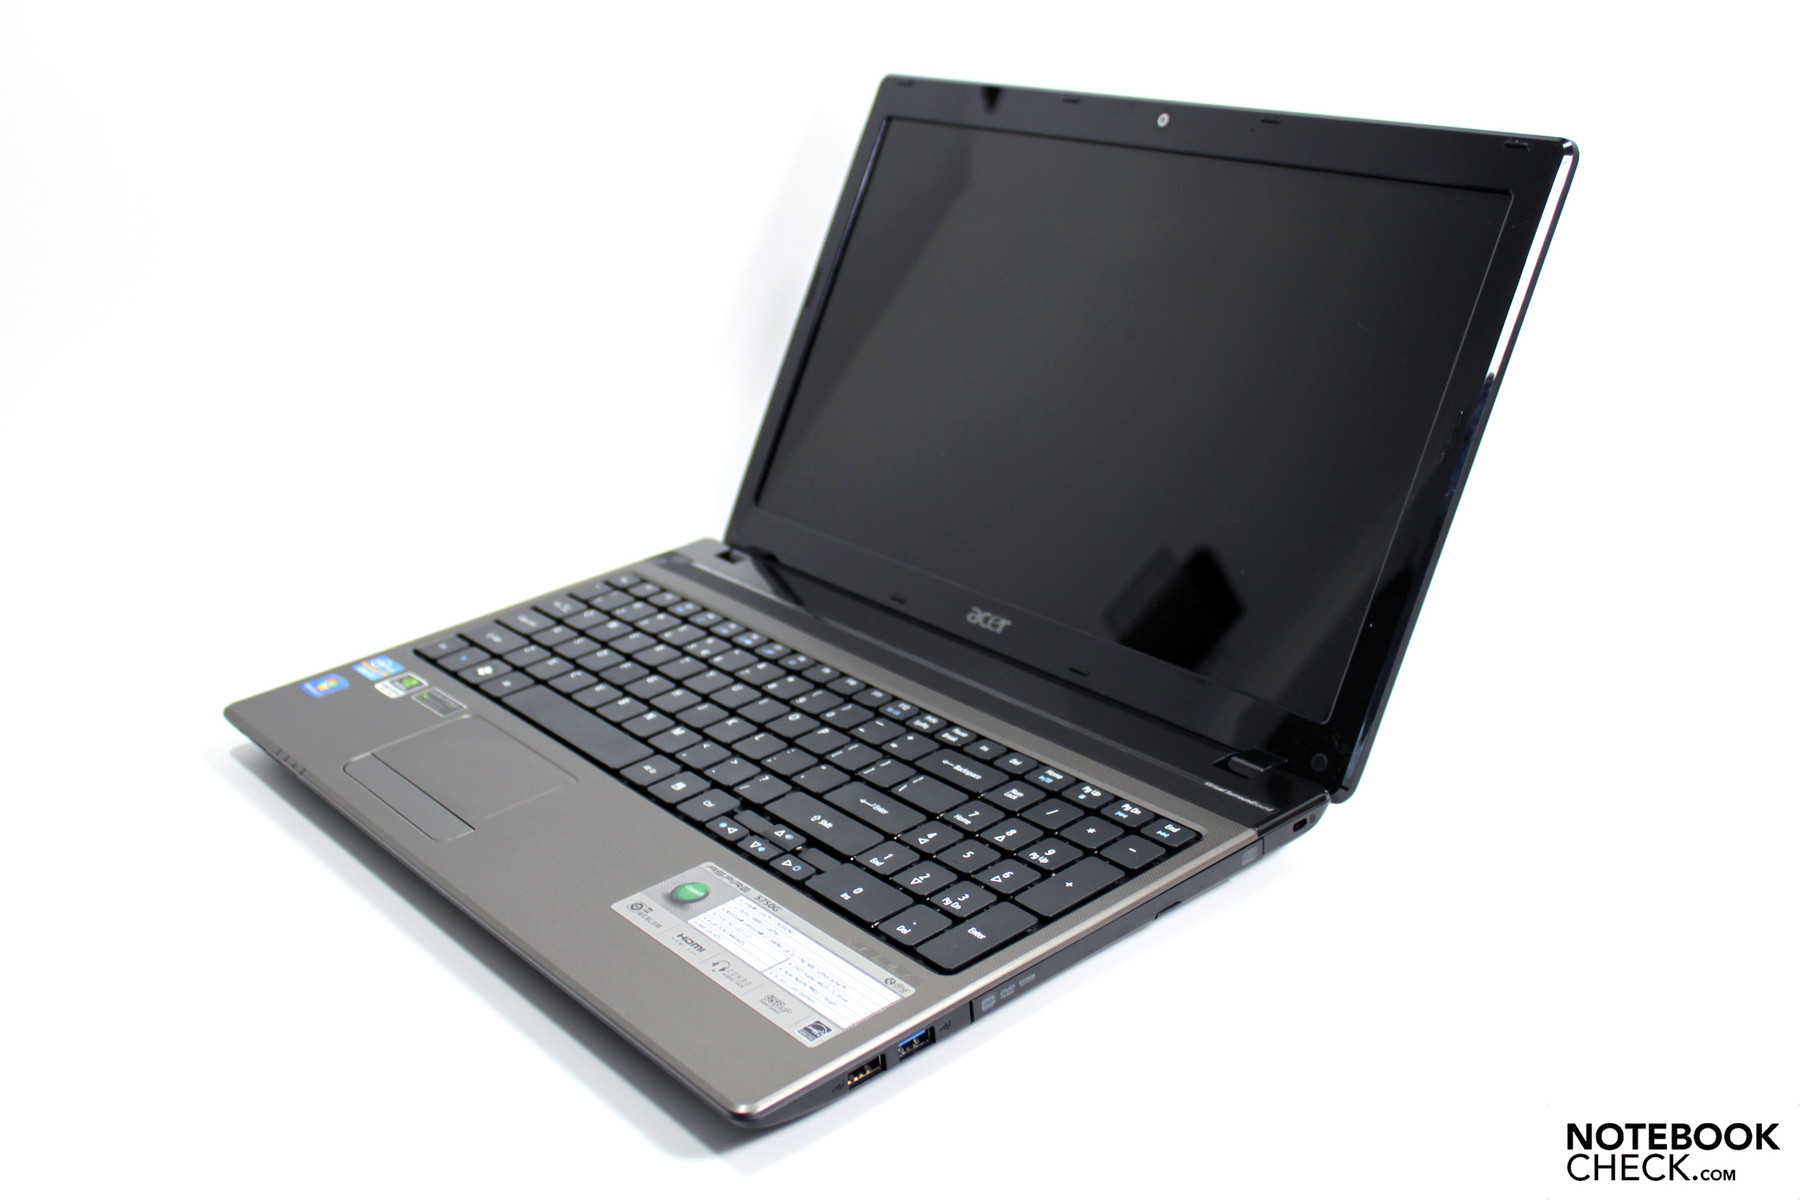 Where can you find reviews of Acer laptops?